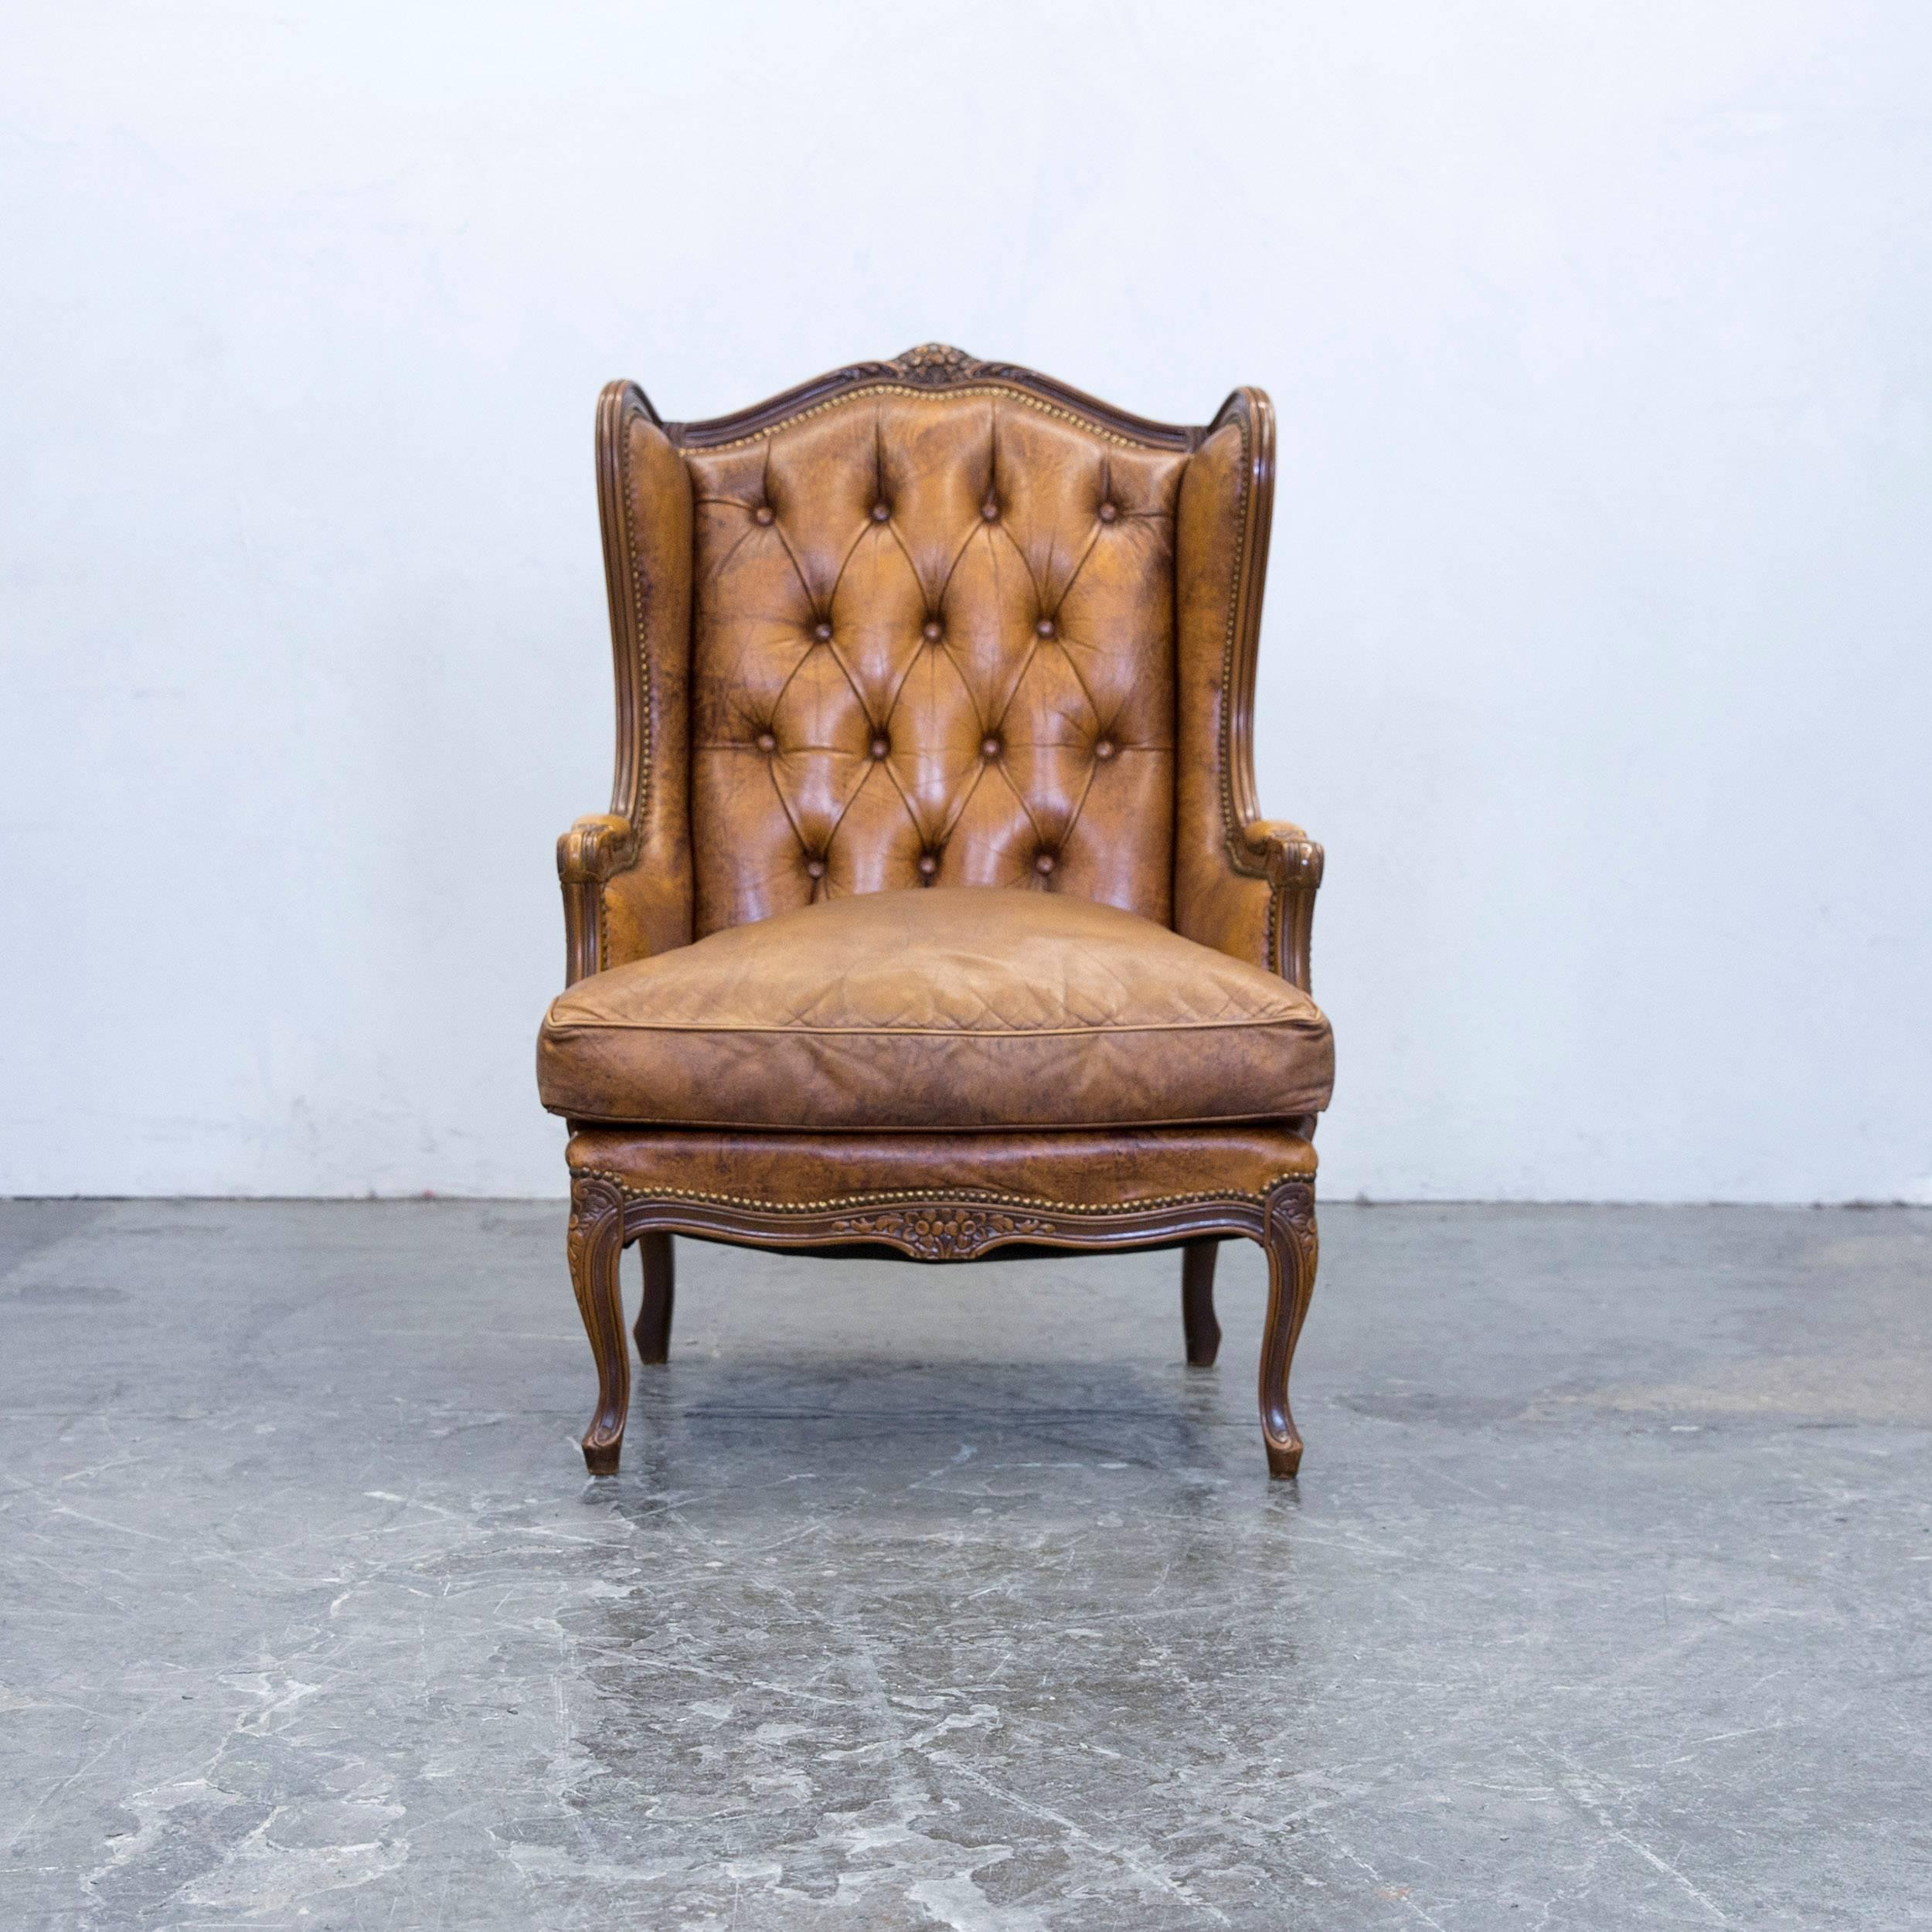 Cognac brown colored Chesterfield leather armchair, in a vintage and elegant design, made for pure comfort and style.